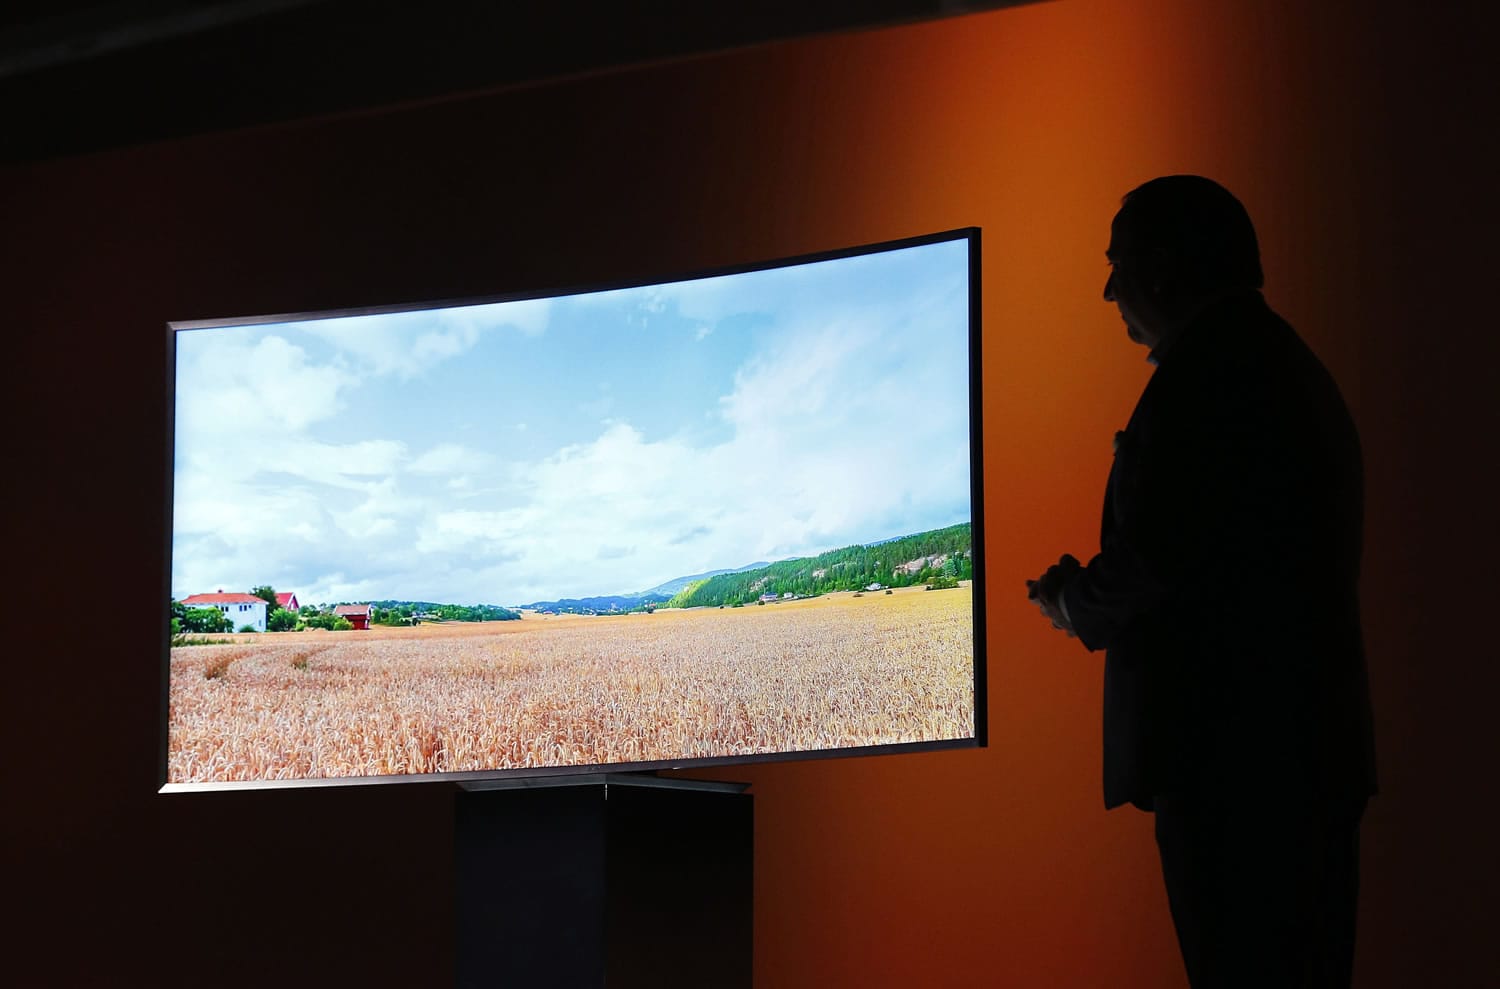 Joe Stinziano of Samsung Electronics America introduces a Samsung SUHD 4K TV on Jan. 5 in Las Vegas. The ultra-high definition picture standard, also called 4K, has four times the pixels of HD (1080p). But do you need it?